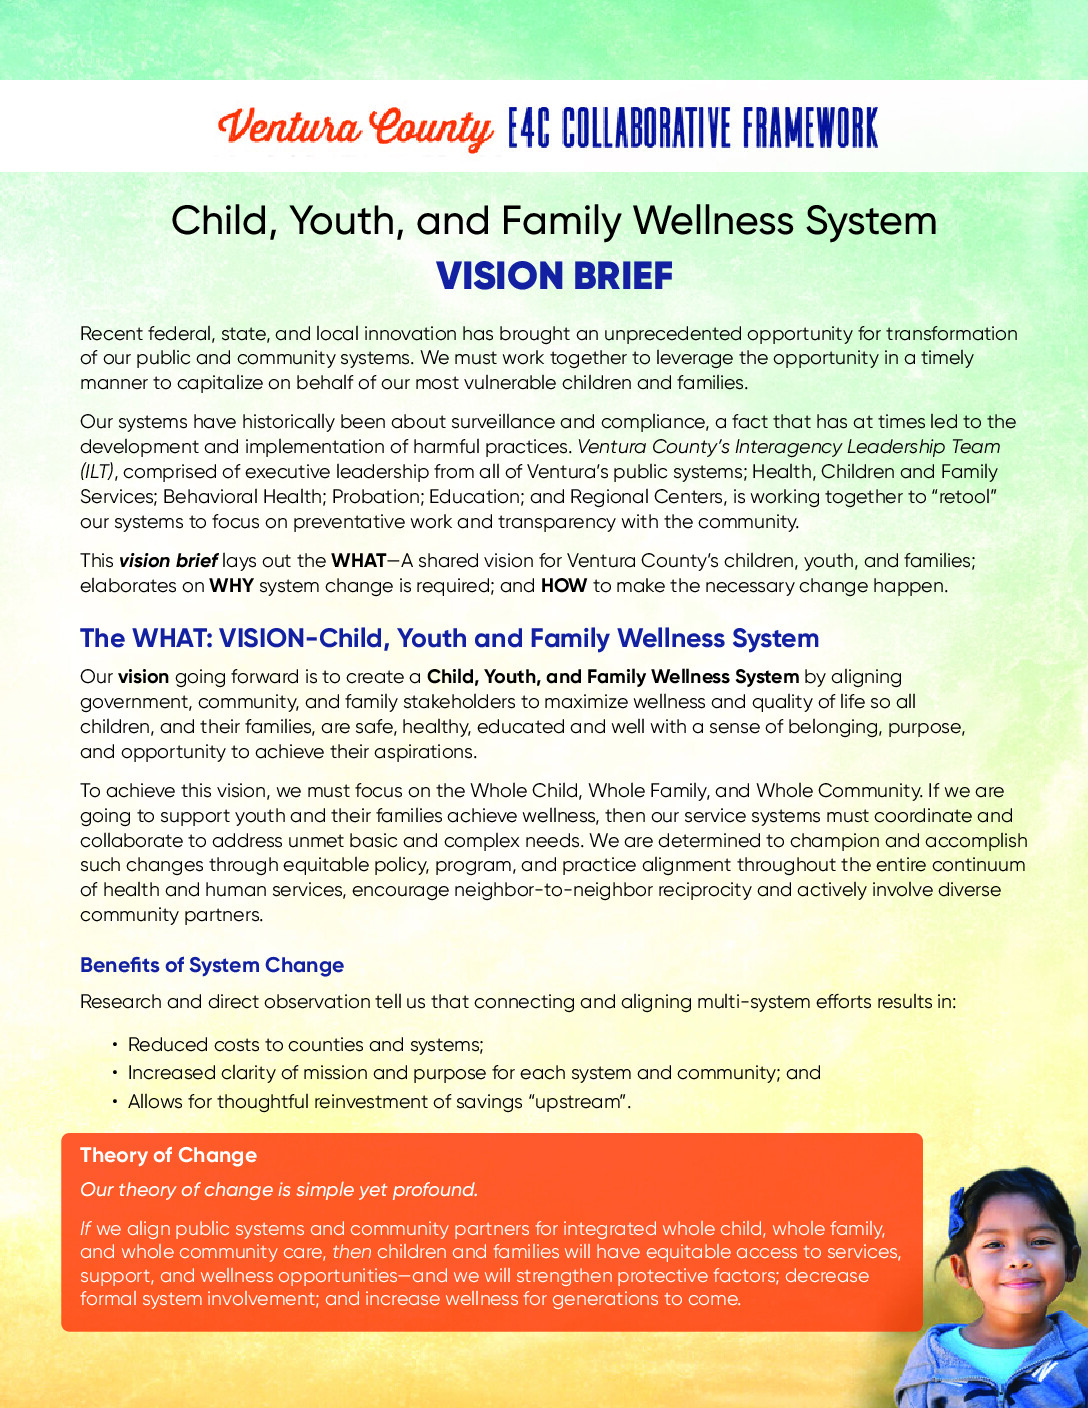 Vision Brief: Child, Youth, and Family Wellness System